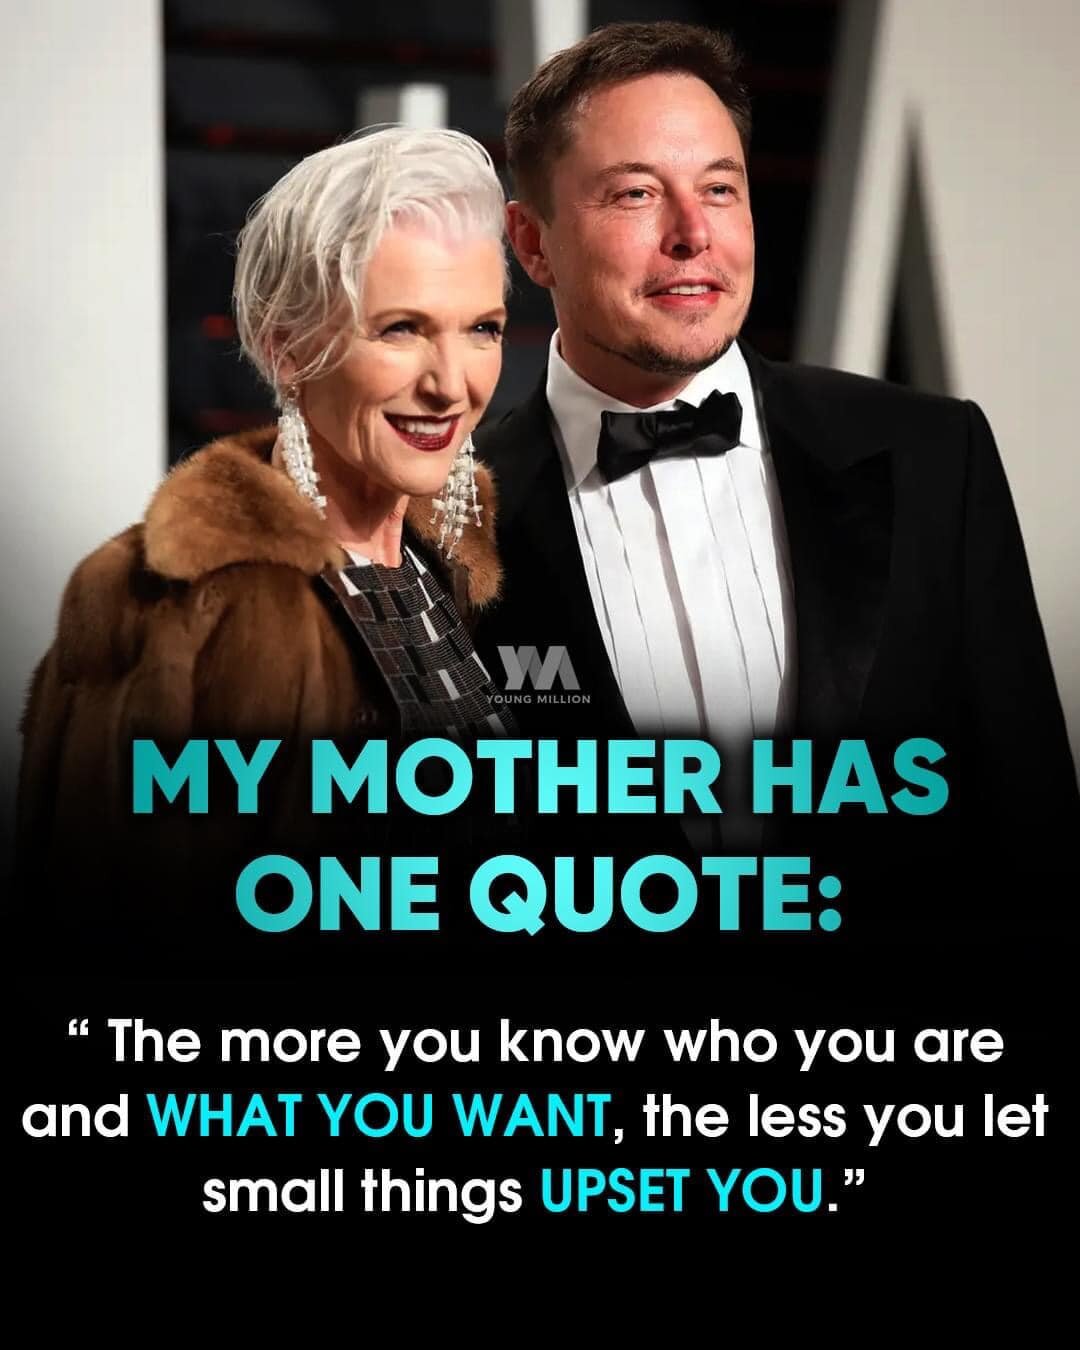 The more you know who you really are; the more unstoppable you become! 
Thank you #elonmusk mum.
Who would like to become unstoppable amd achieve what you want despite the crisis, despite the government, despite all the negativity around you? 
If thi